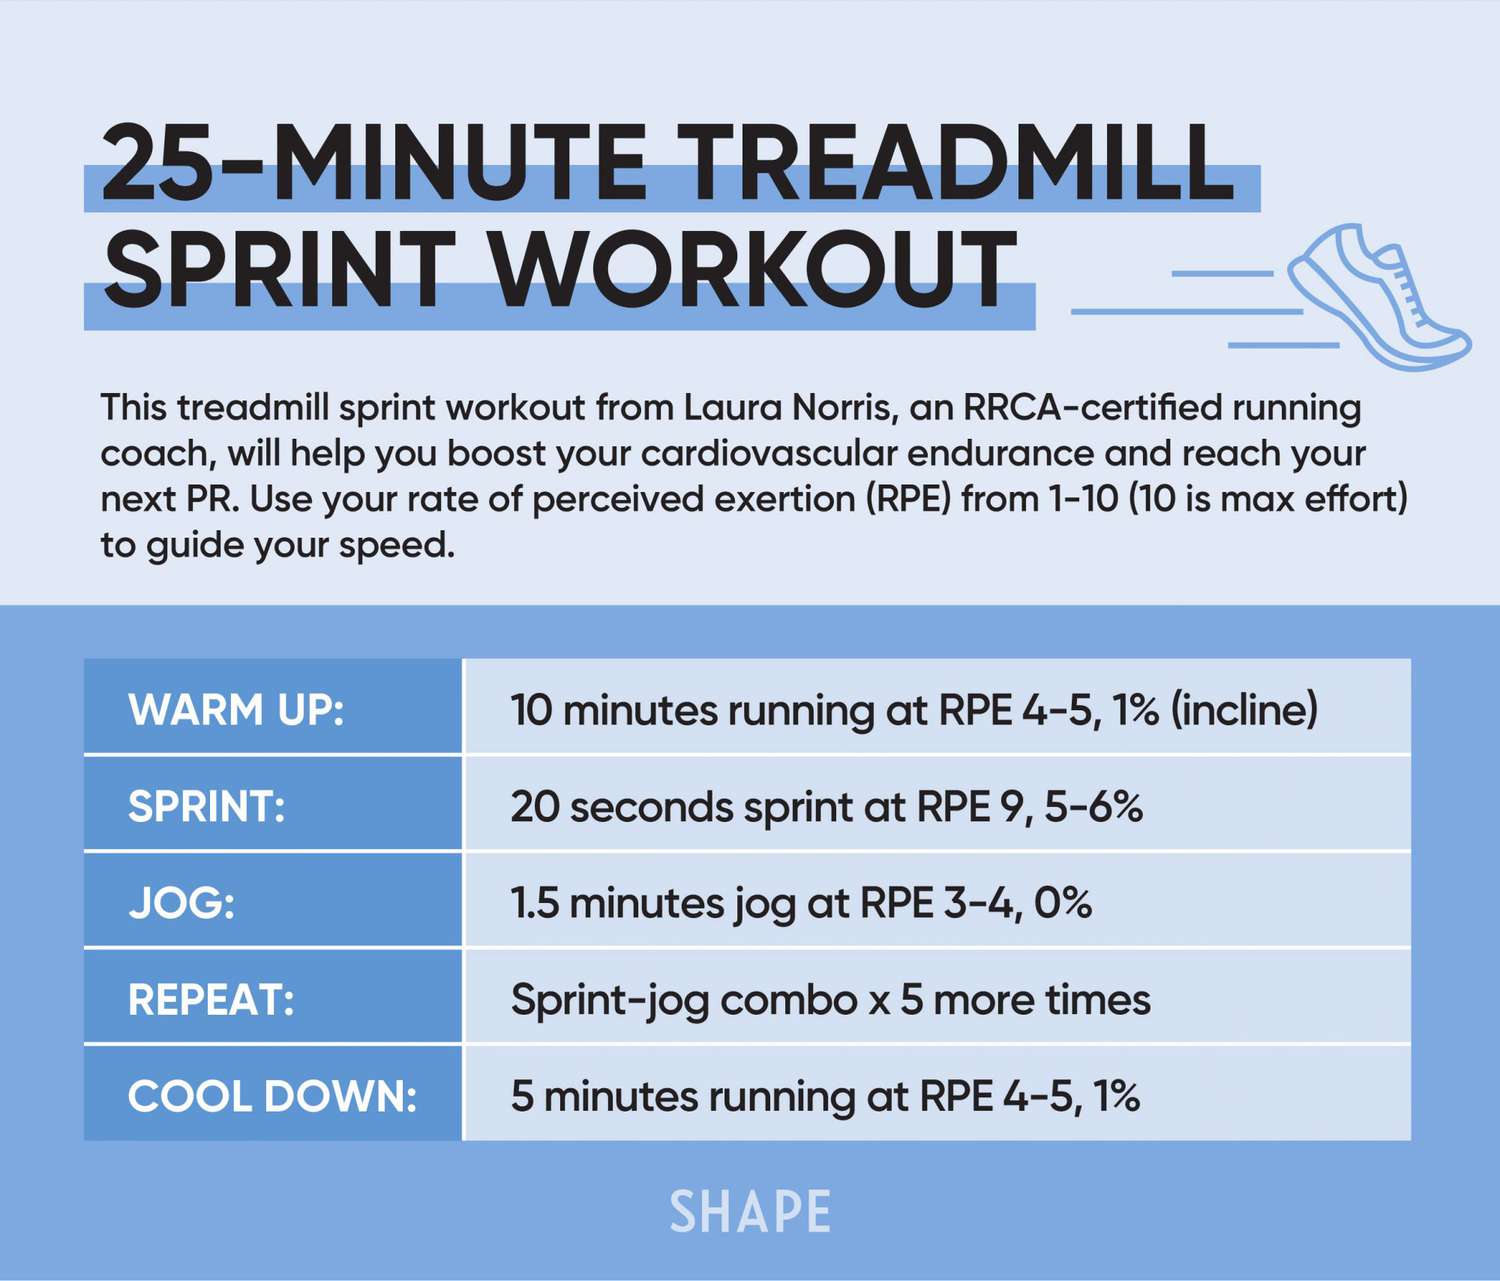 Graphic of 25-minute treadmill sprint workout